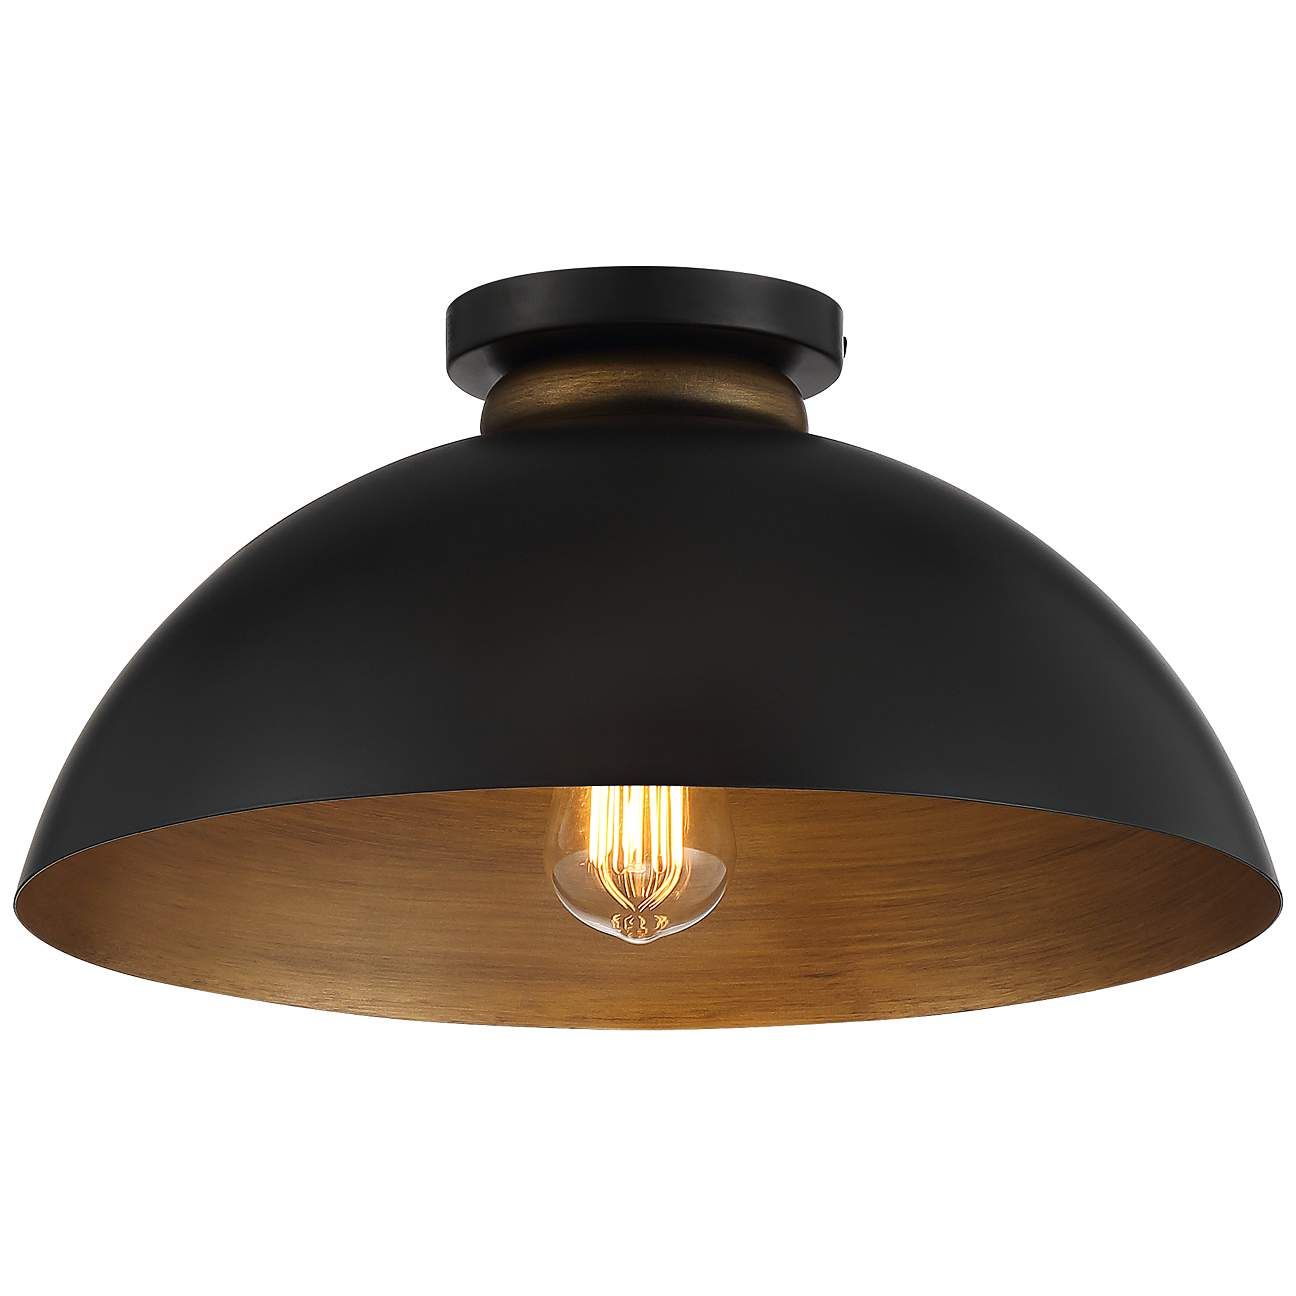 Janie 15 1/2" Wide Black and Gold Dome Ceiling Light | Lamps Plus